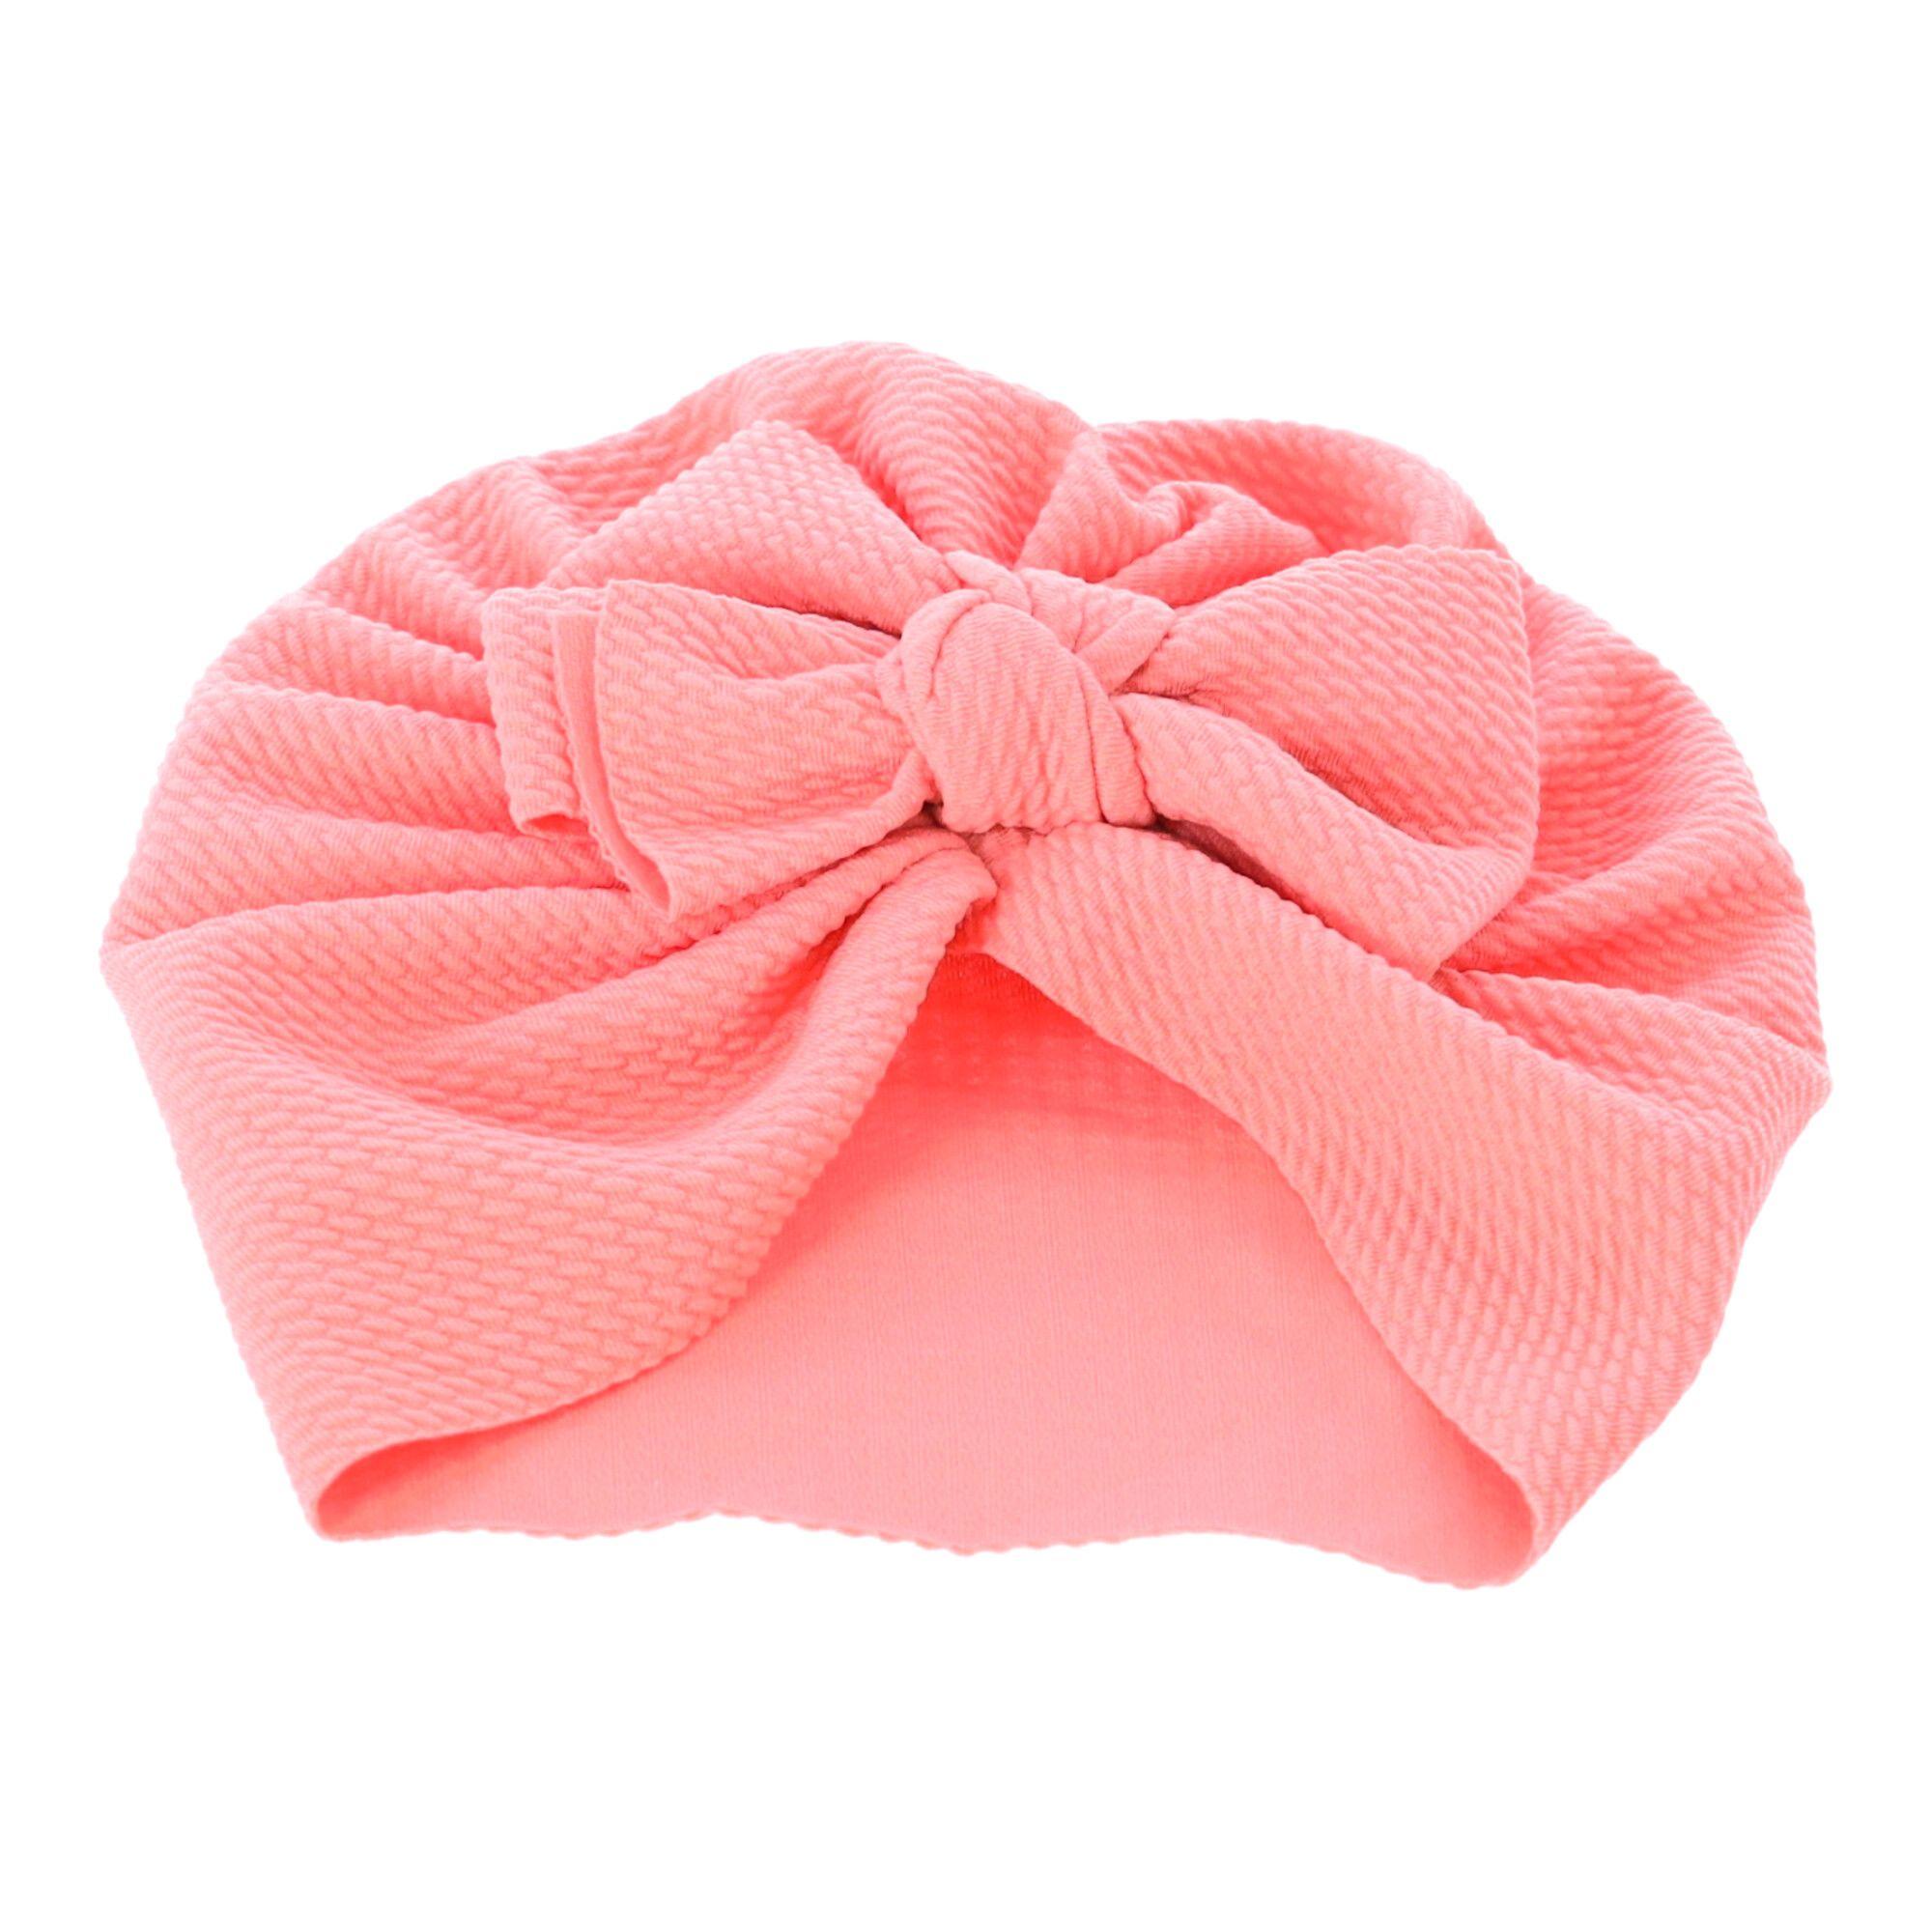 Baby turban with a bow, girl's hat - pink